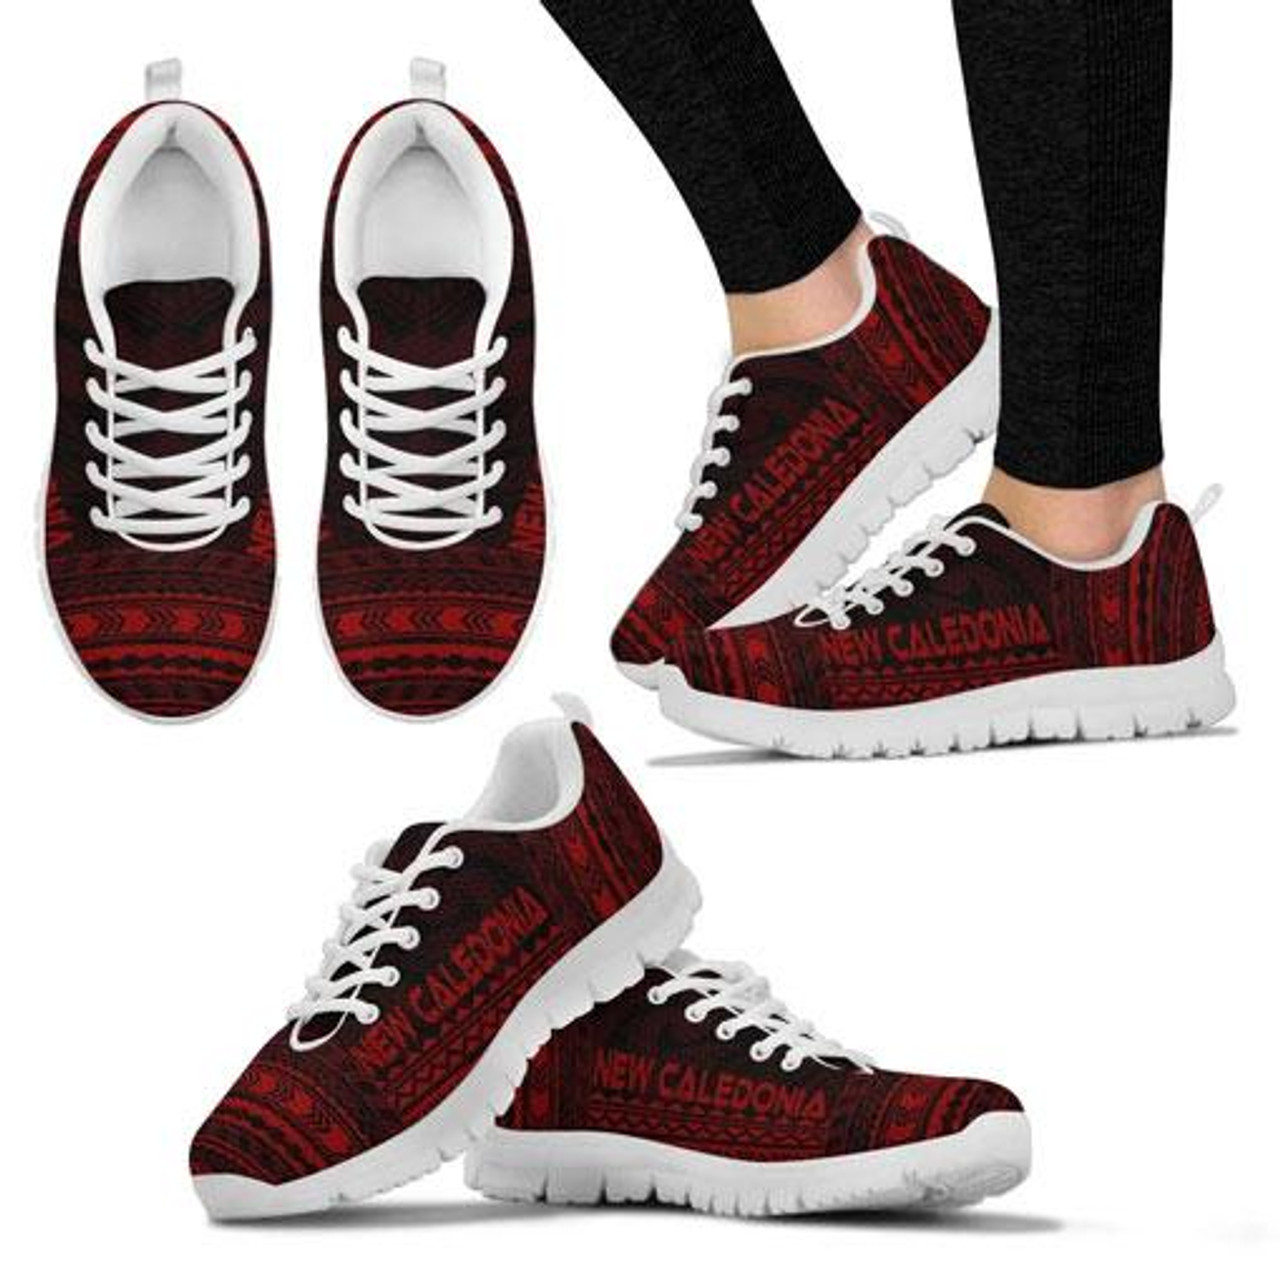 New Caledonia Sneakers - New Caledonia Polynesian Chief Tattoo Deep Red Version 3